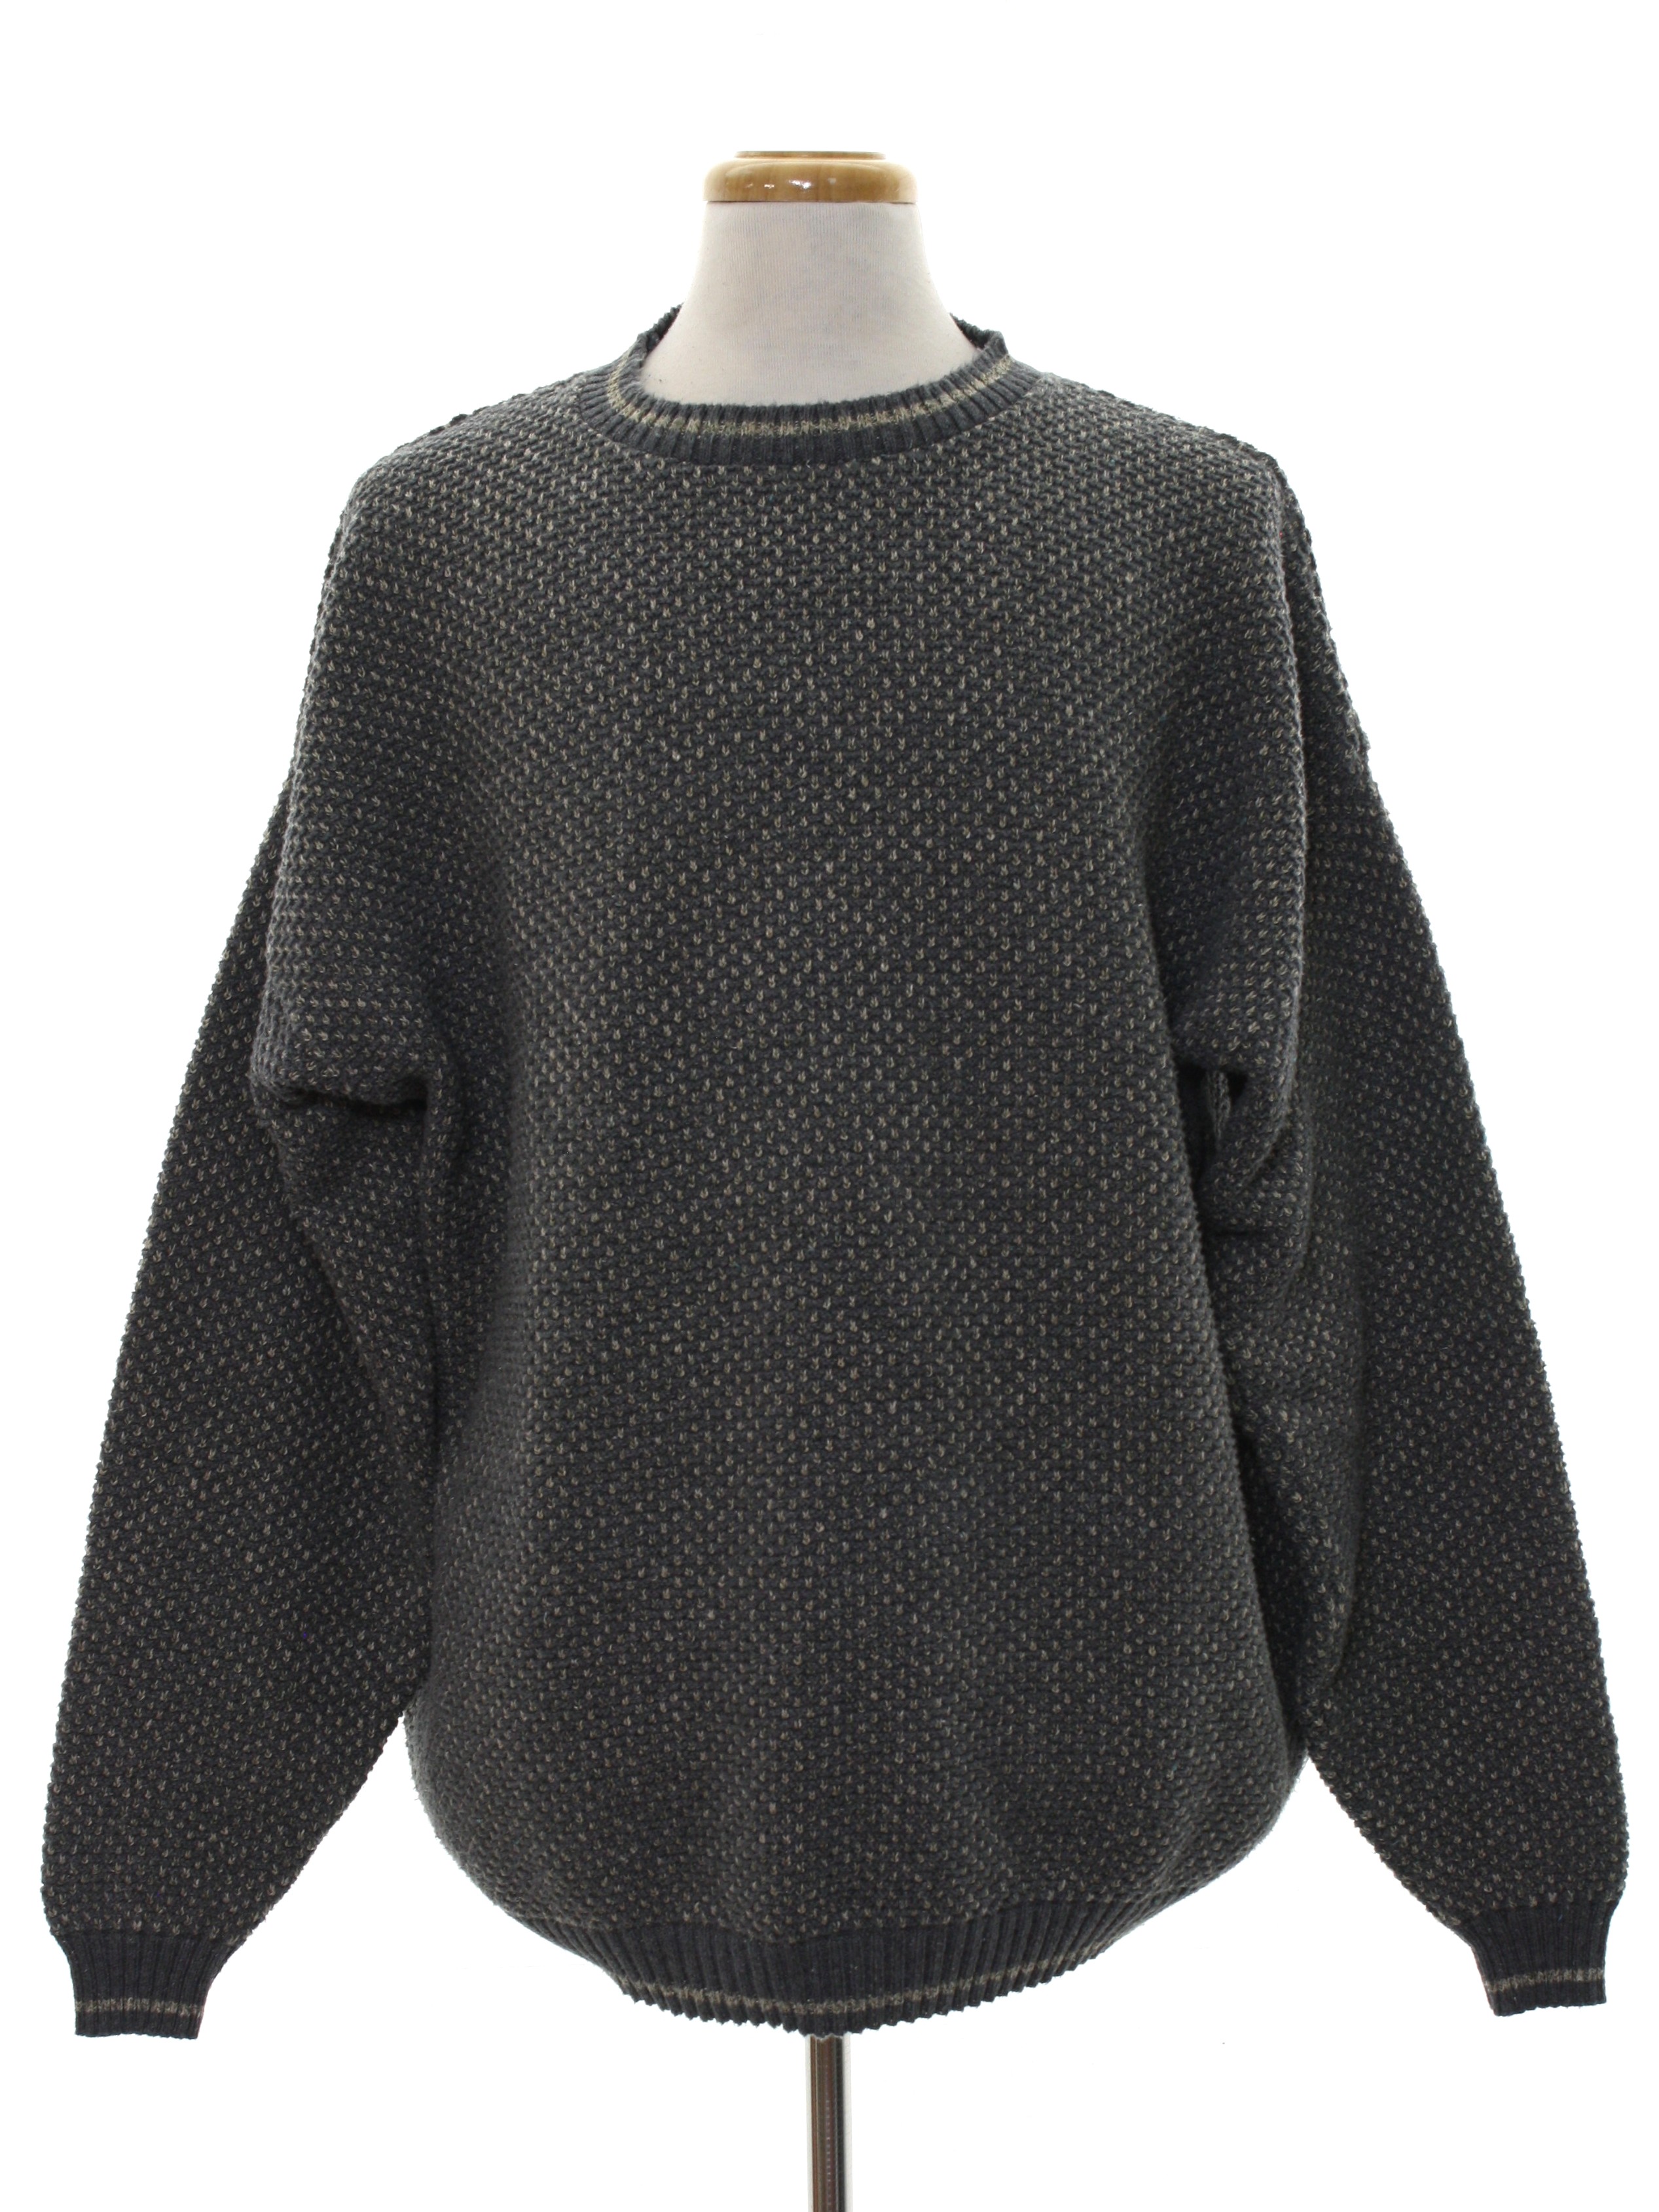 Retro 1980's Sweater (Woolrich) : 80s -Woolrich- Mens grey and tan ...